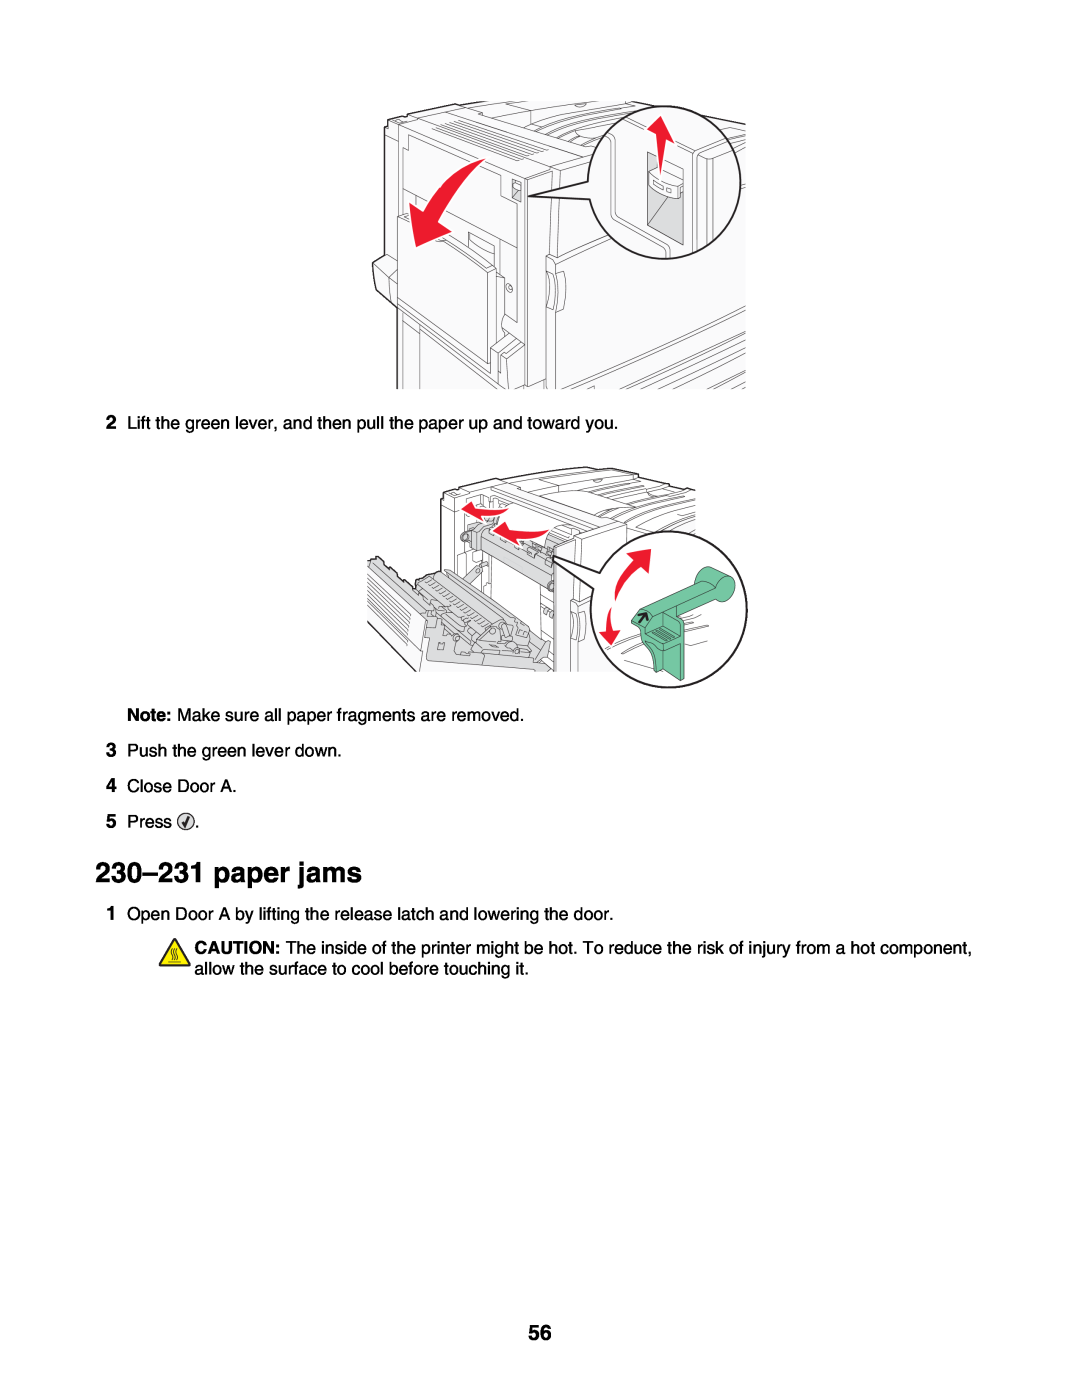 Lexmark C935 manual paper jams, Lift the green lever, and then pull the paper up and toward you 